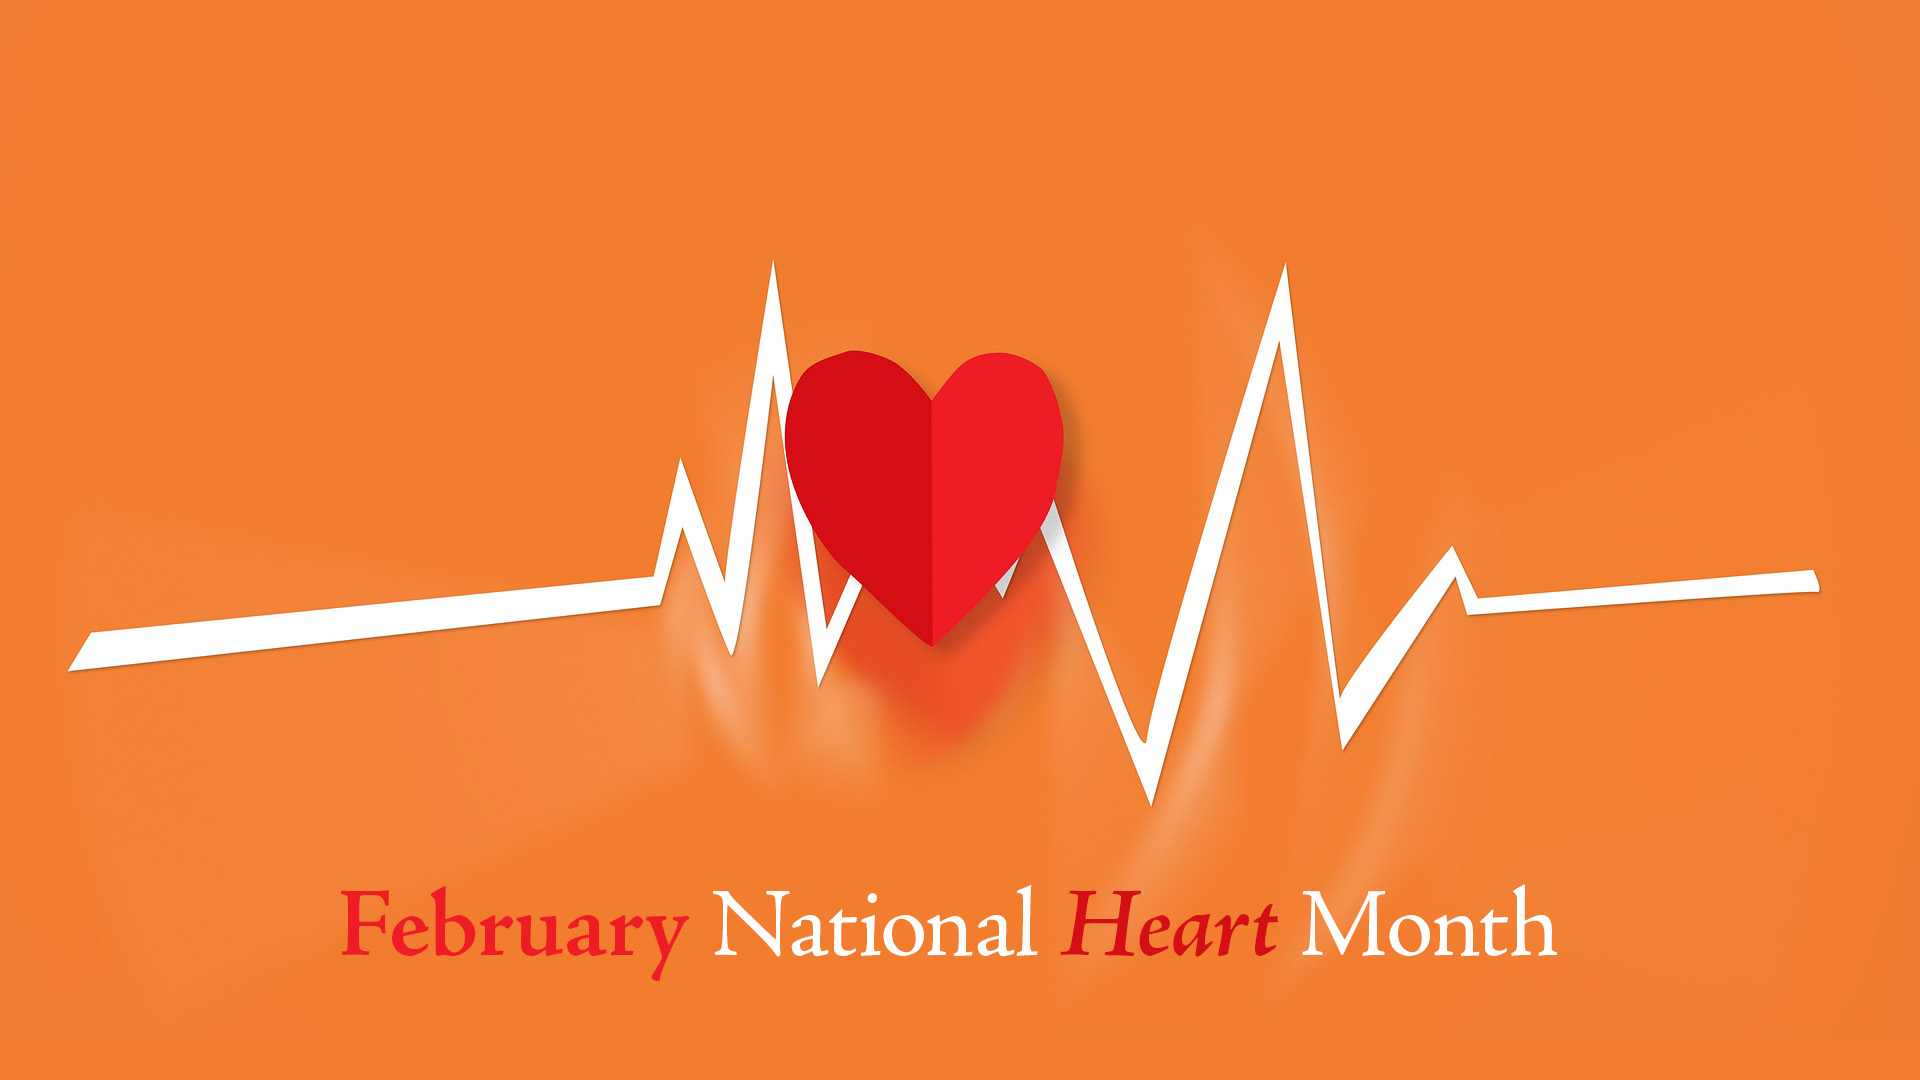 Orange background white a Red heart in the middle with a White heart beat spanning across the graphic. "February NAtional Heart Month is spelled out across the bottom of the graphic in a serif font, calling out February and Heart.